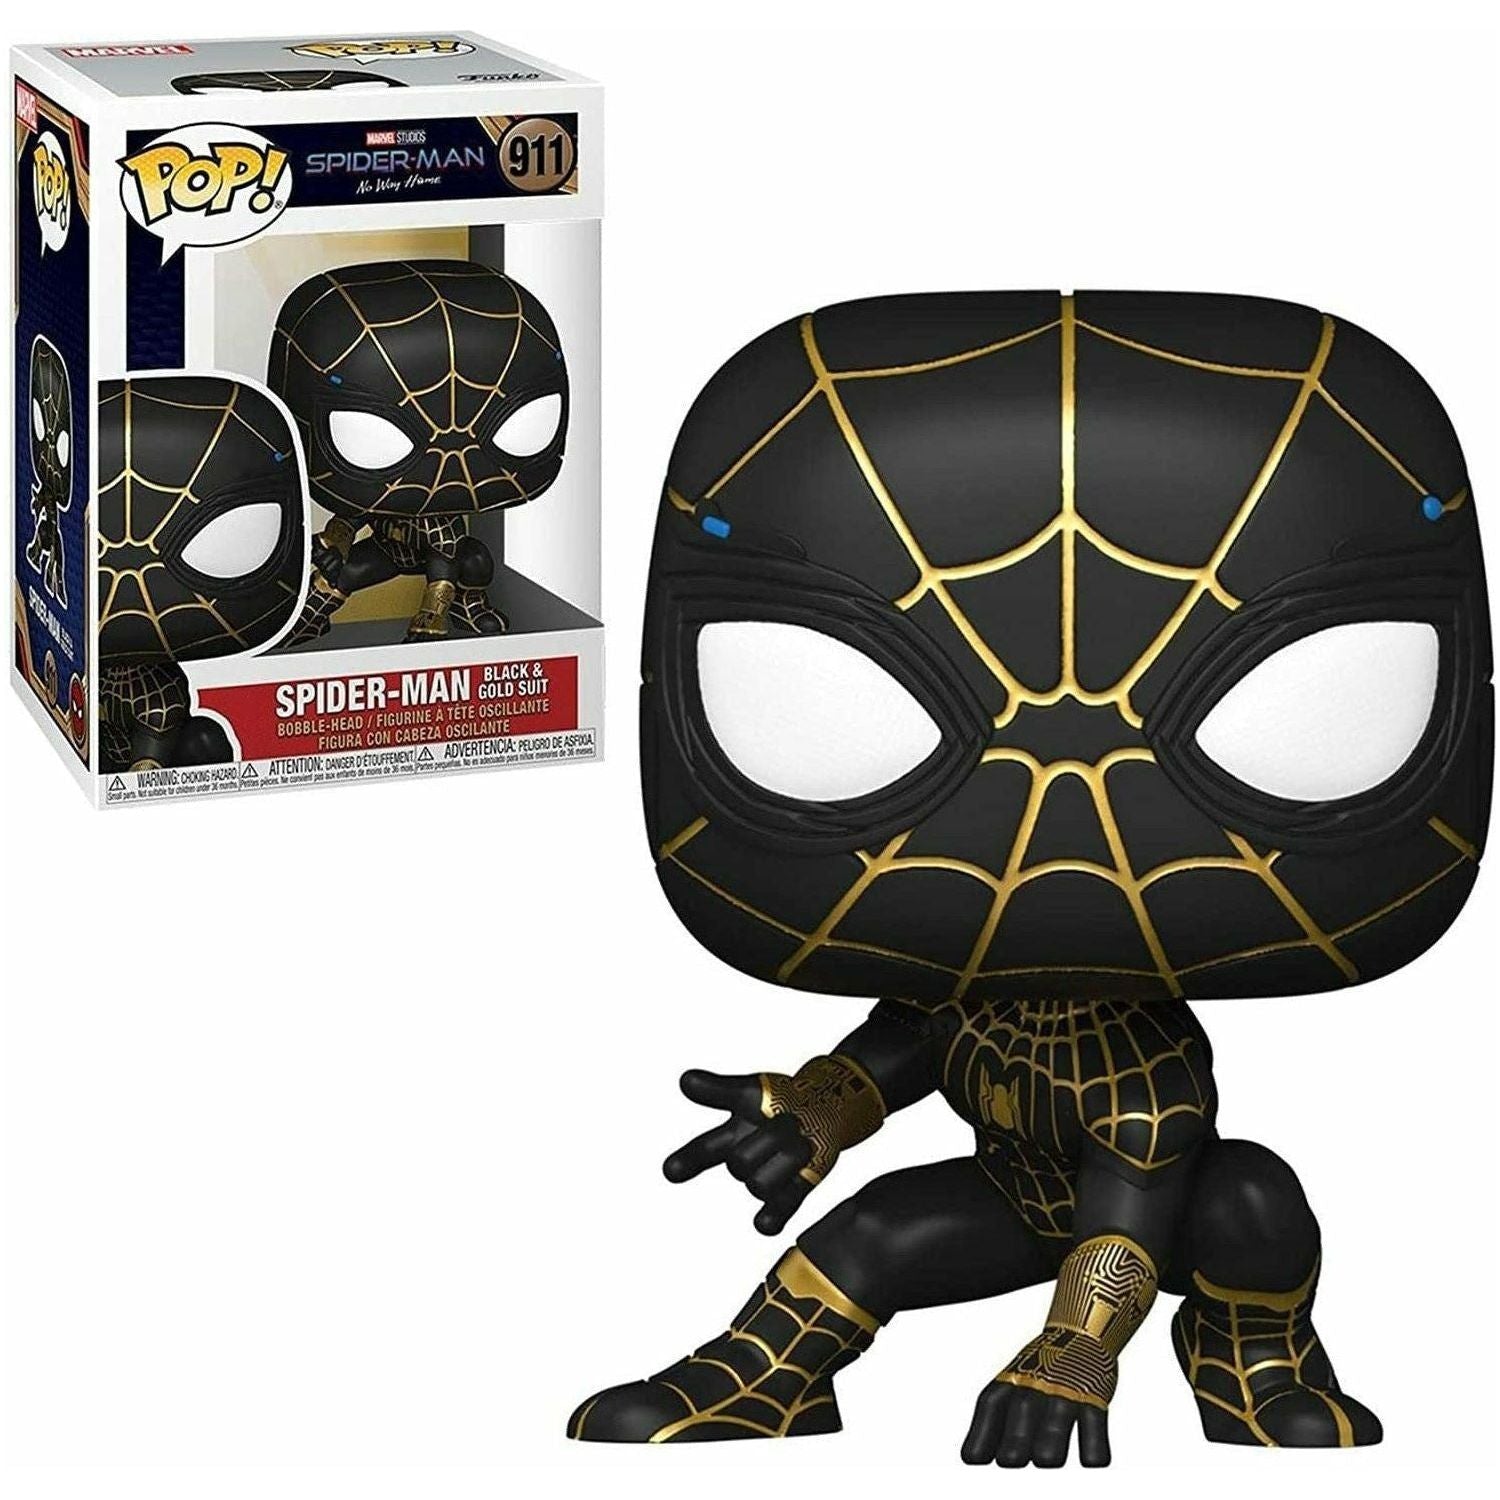 Funko Pop! Marvel Spider-Man Spiderman in Black and Gold Suit - BumbleToys - 18+, 4+ Years, 5-7 Years, Action Figures, Avengers, Boys, Characters, Funko, Pre-Order, Spider man, Spiderman